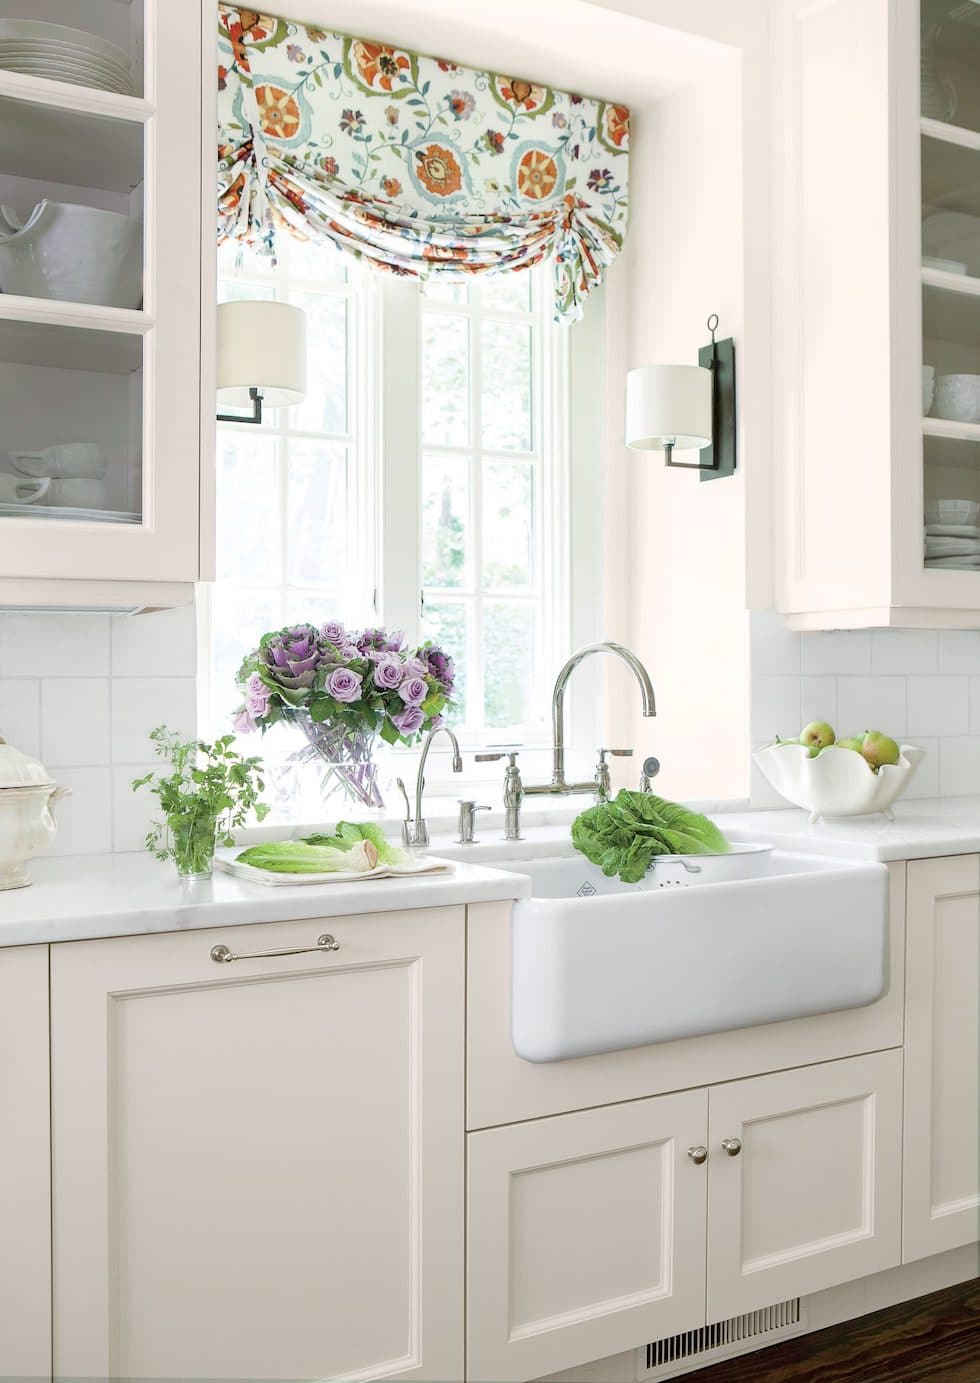 A Classic White Kitchen with Colorful Patterned Roman Shades